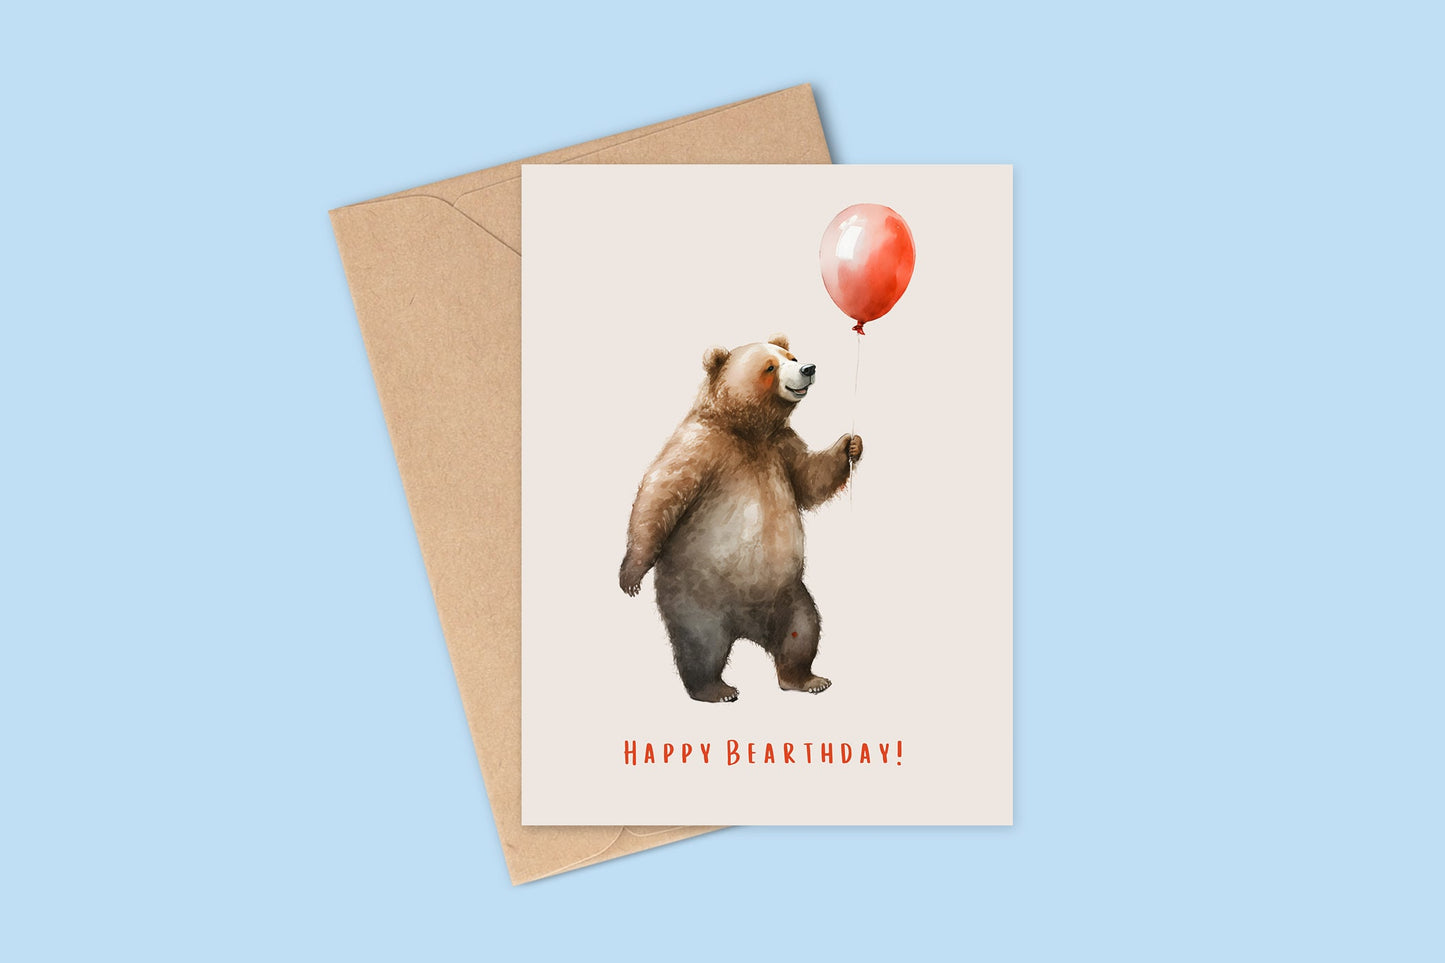 Cute Birthday Card for Friend, Happy Bearthday, Cute Card, Birthday card, Funny Birthday Cards, Card for Animal Lover